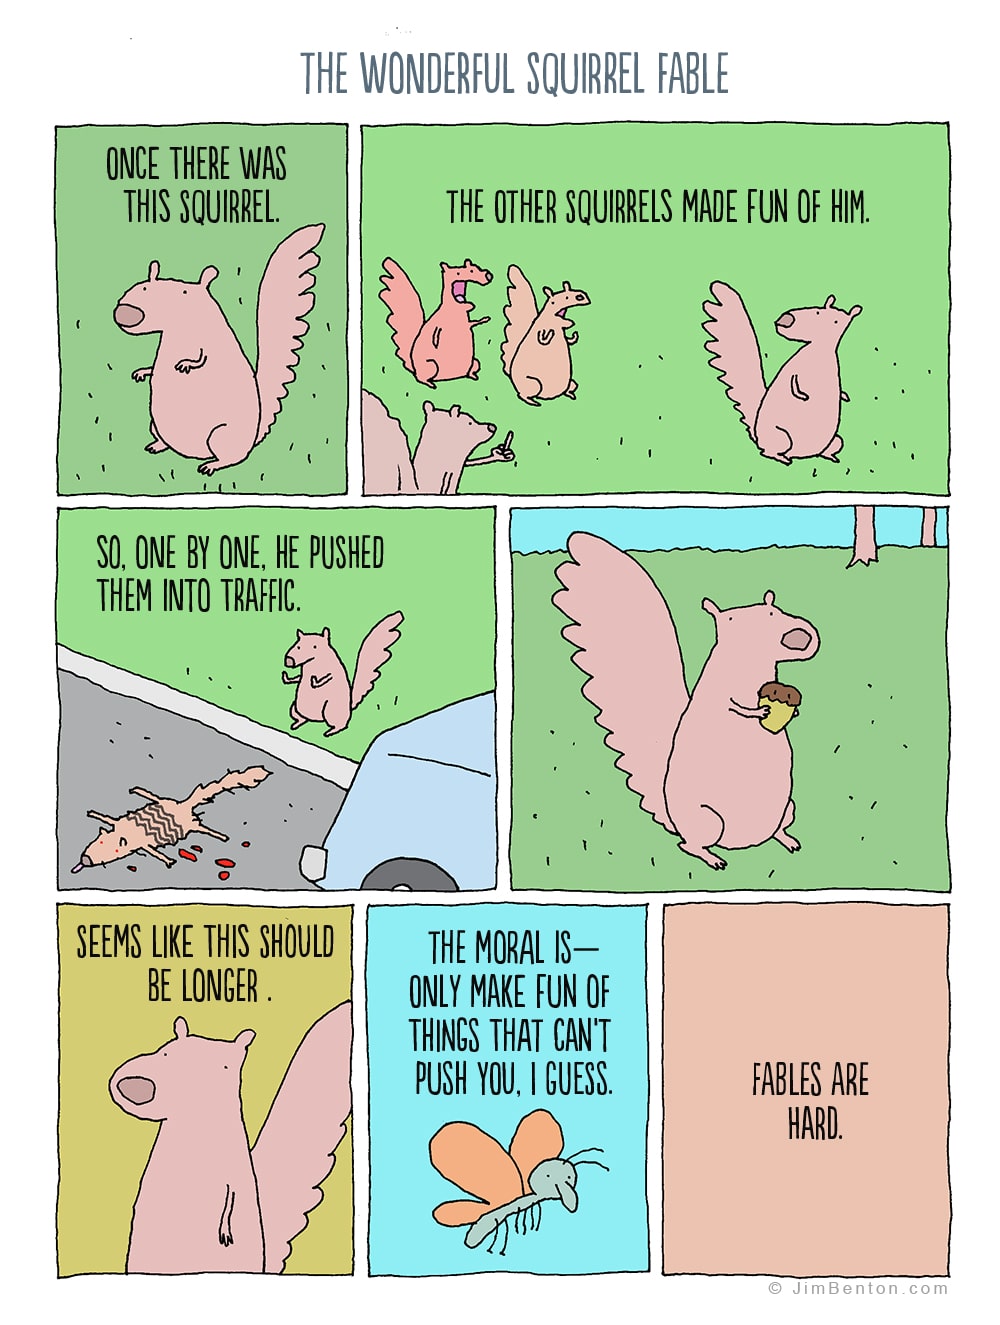 comics comics comics text: ONCE THERE WAS THIS SQUIRREL. THE WONDERFUL SQUIRREL FABLE THE OTHER SQUIRRELS MADE FUN OF HIM. SO, ONE BY ONE, HE PUSHED THEM INTO TRAFFIC. SEEMS LIKE THIS SHOULD BE LONGER . THE MORAL IS- ONLY MAKE FUN OF THINGS THAT CANT PUSH YOU, I GUESS. FABLES ARE HARD. O JimBenton.com 